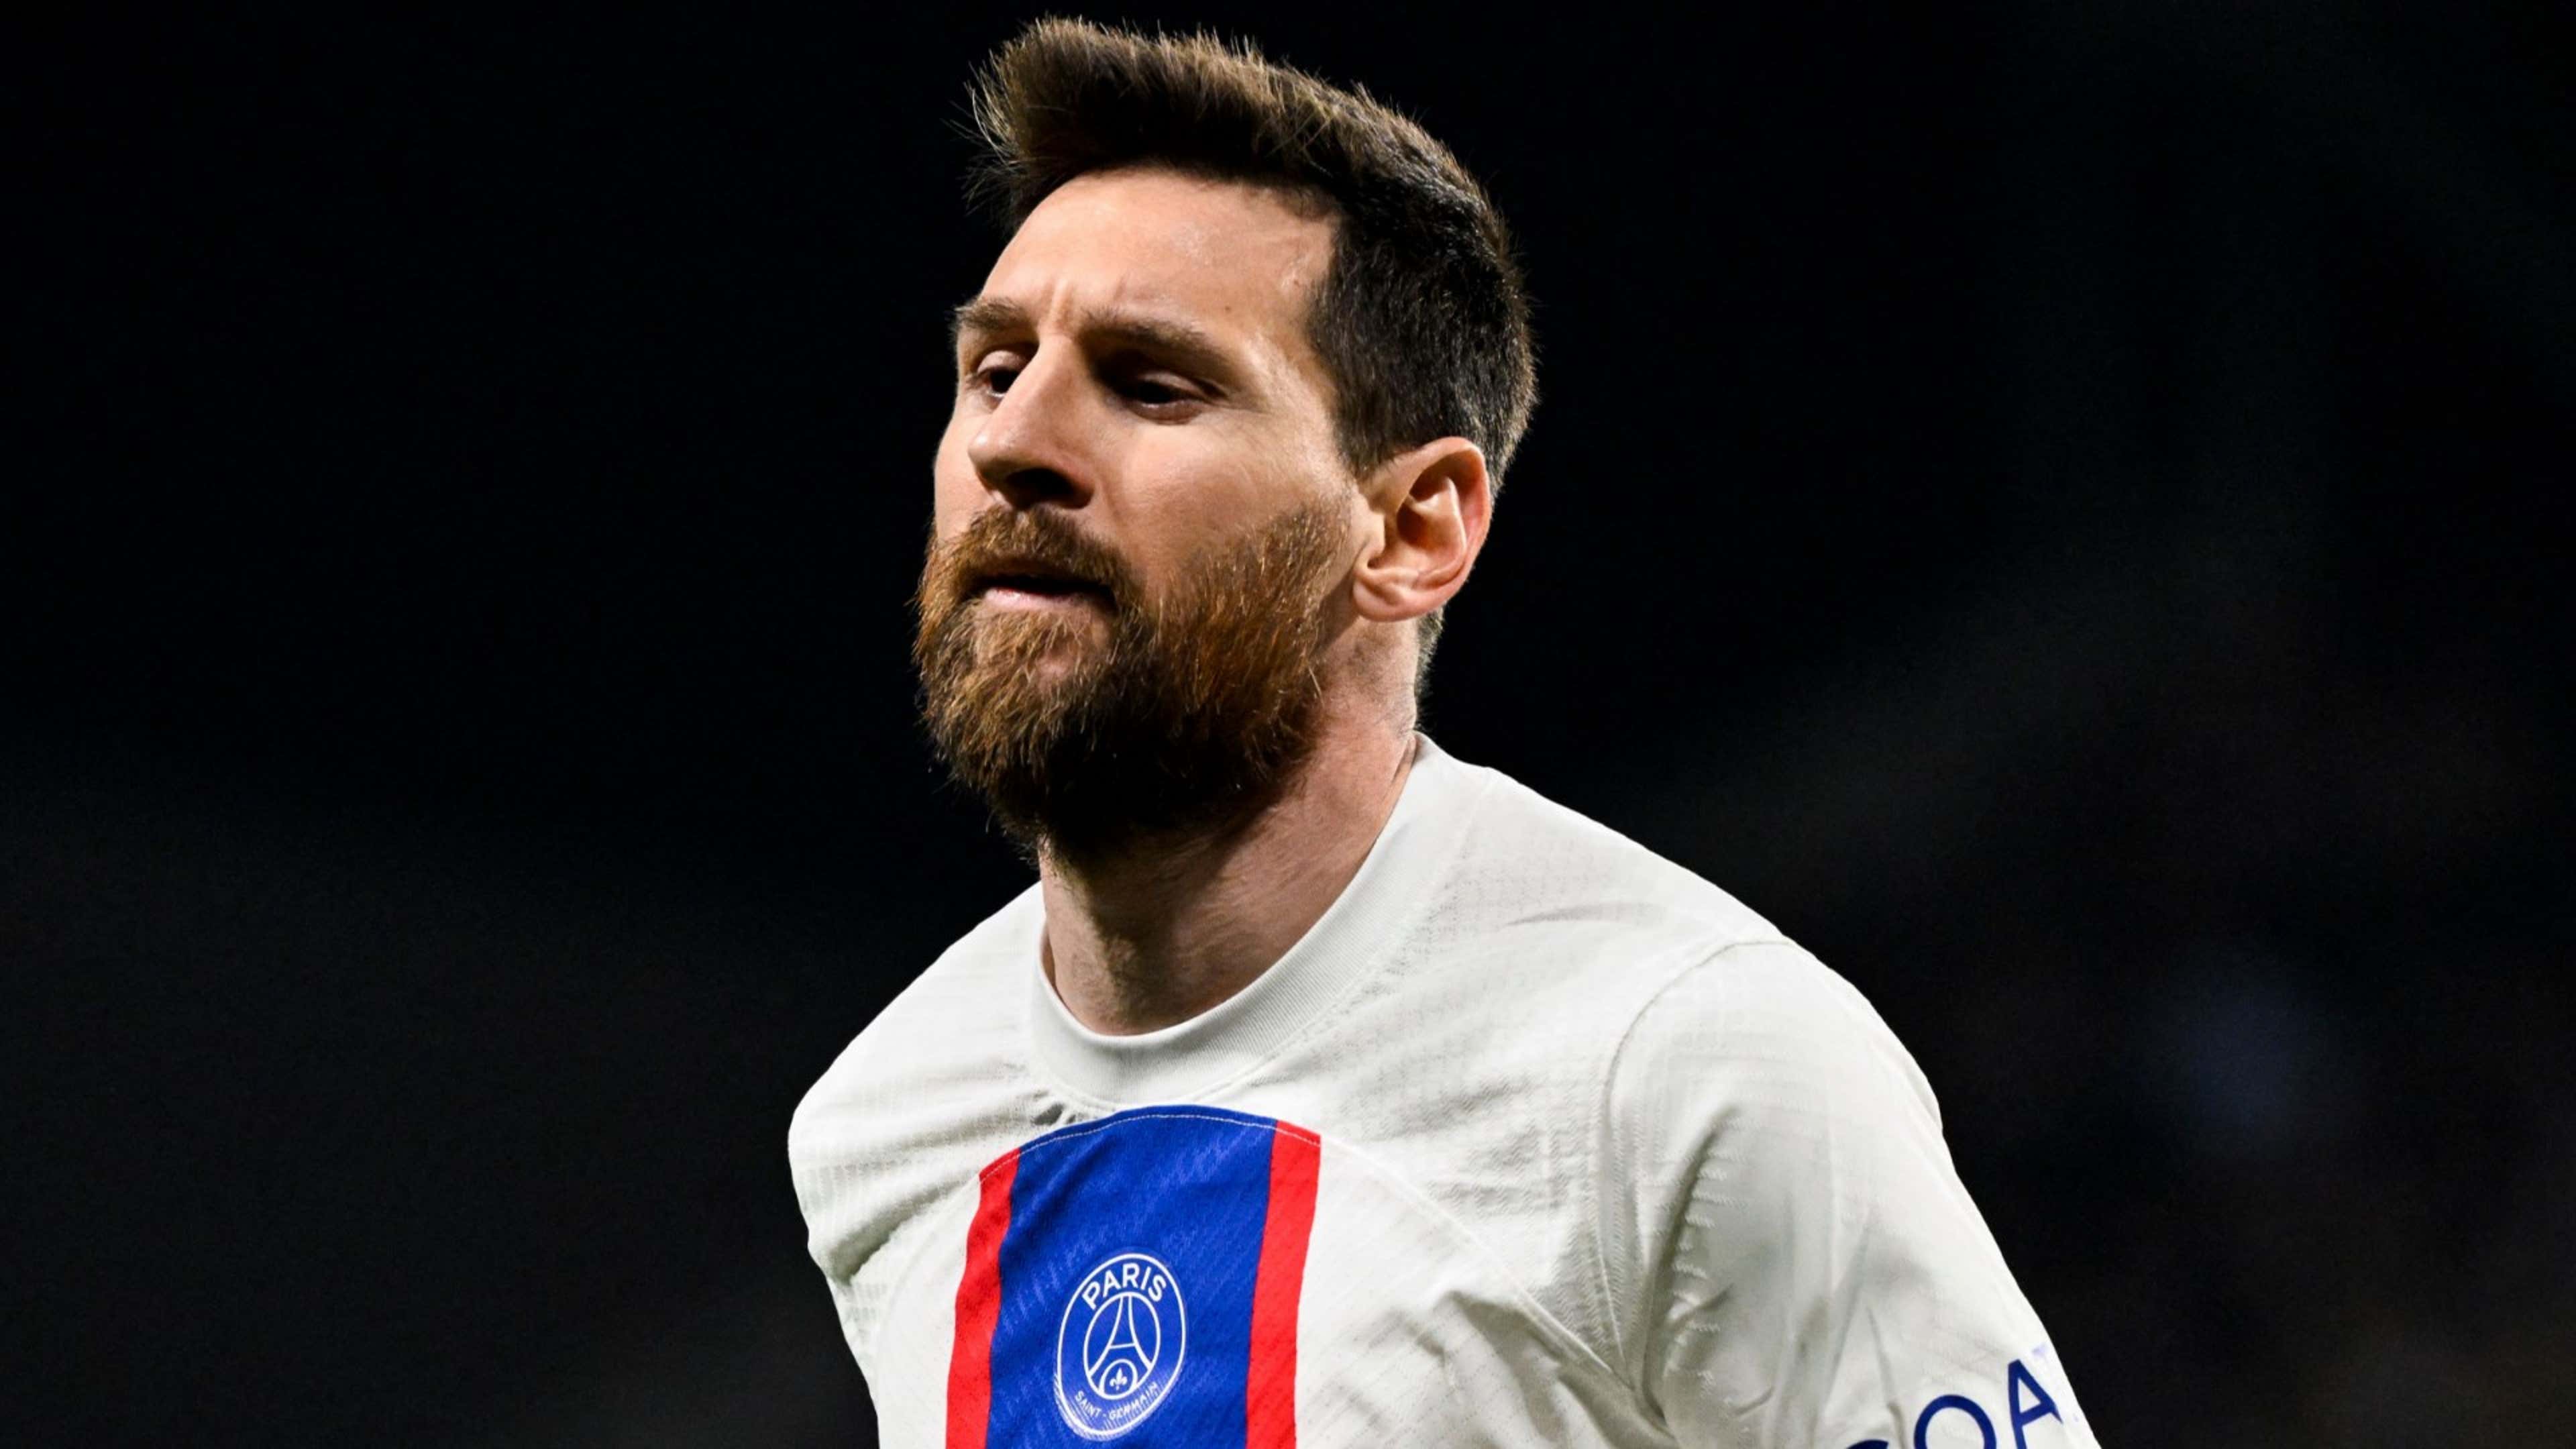 Balance is most important' - Henry sends warning to Messi and PSG